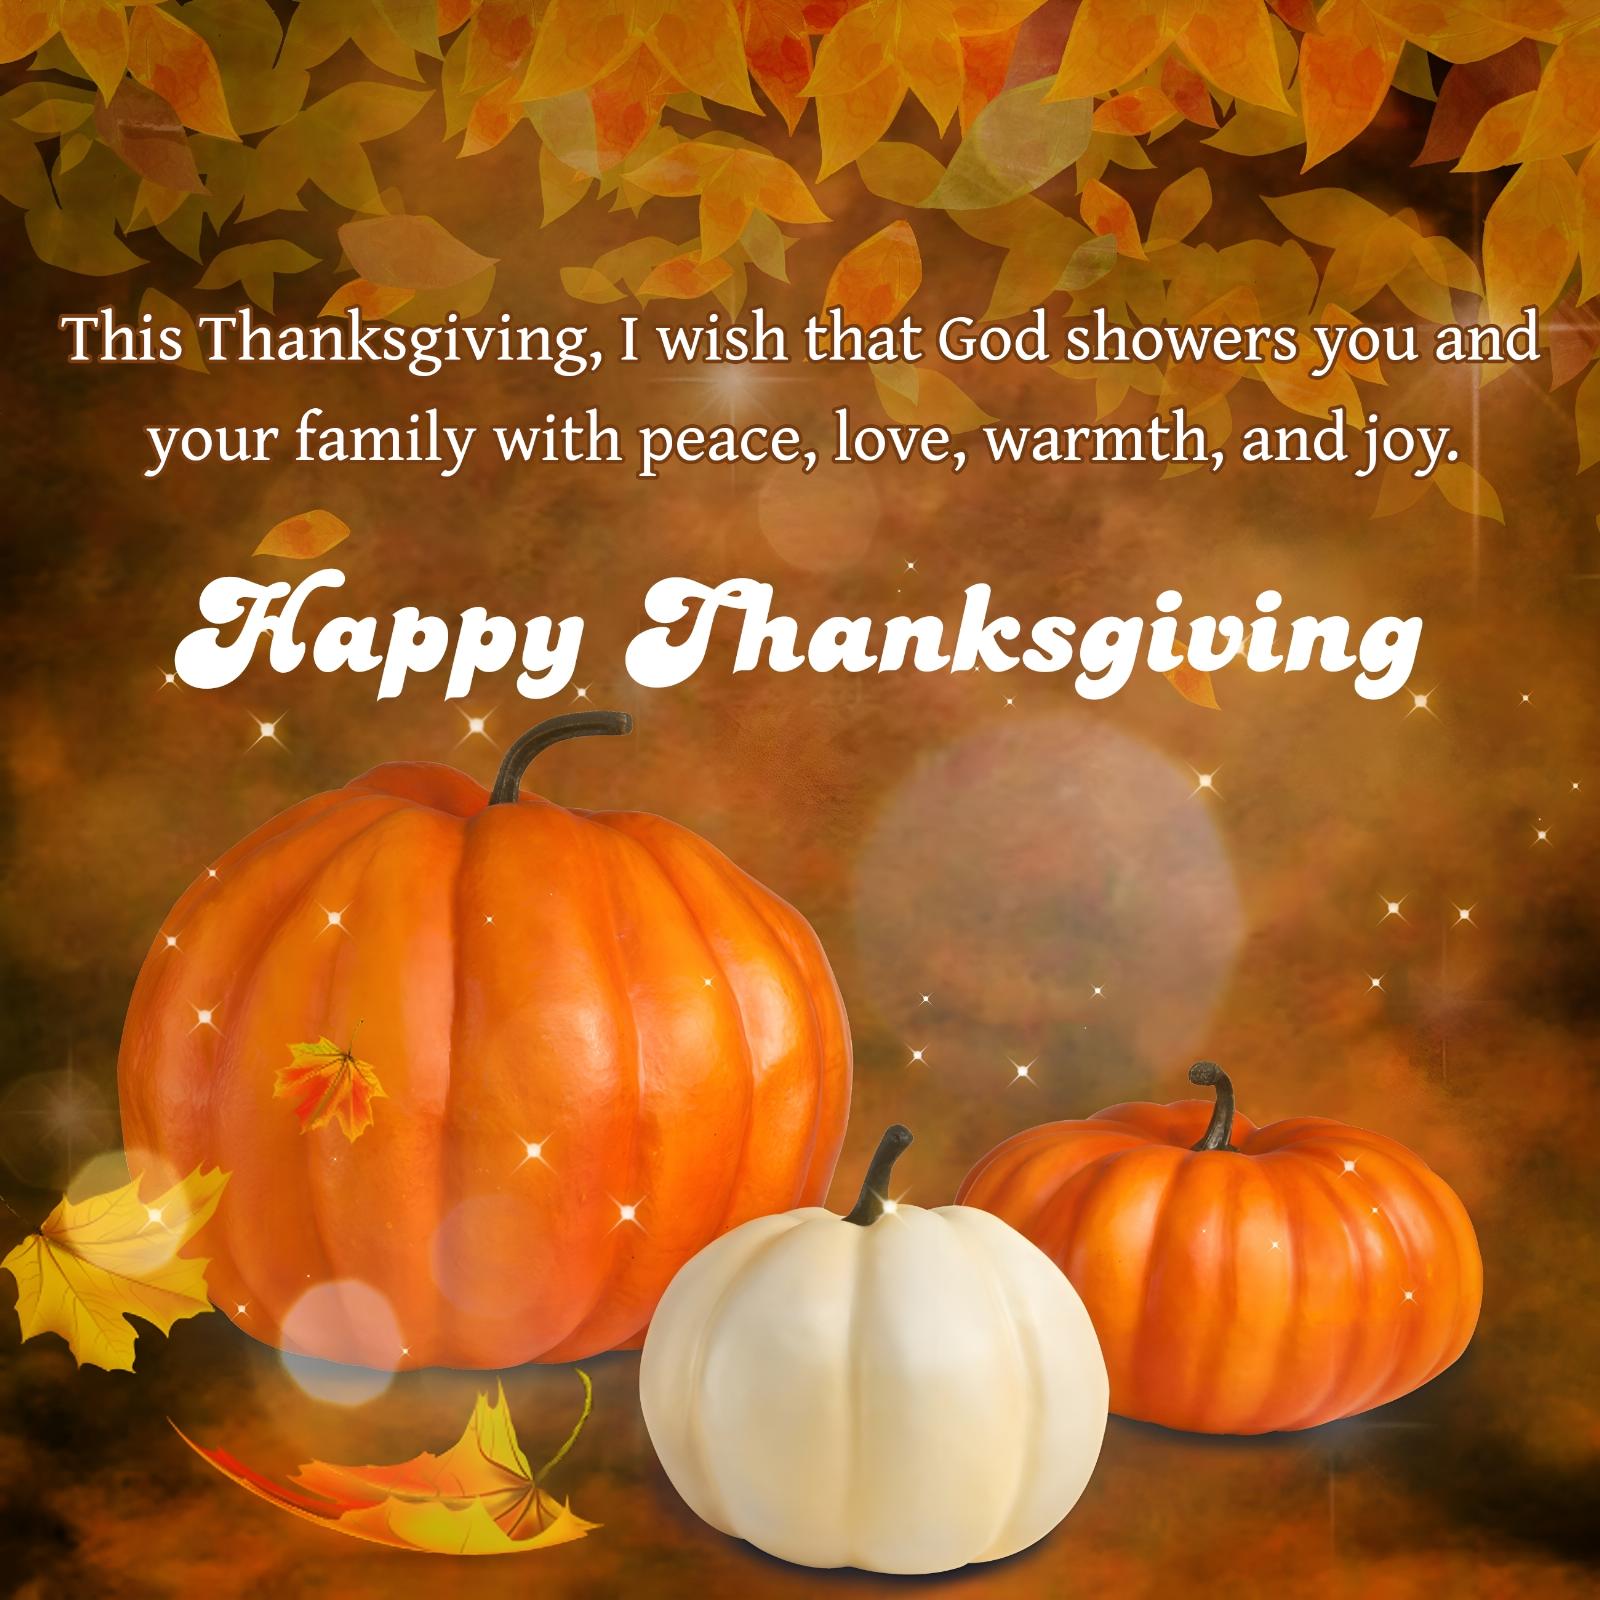 This Thanksgiving I wish that God showers you and your family with peace